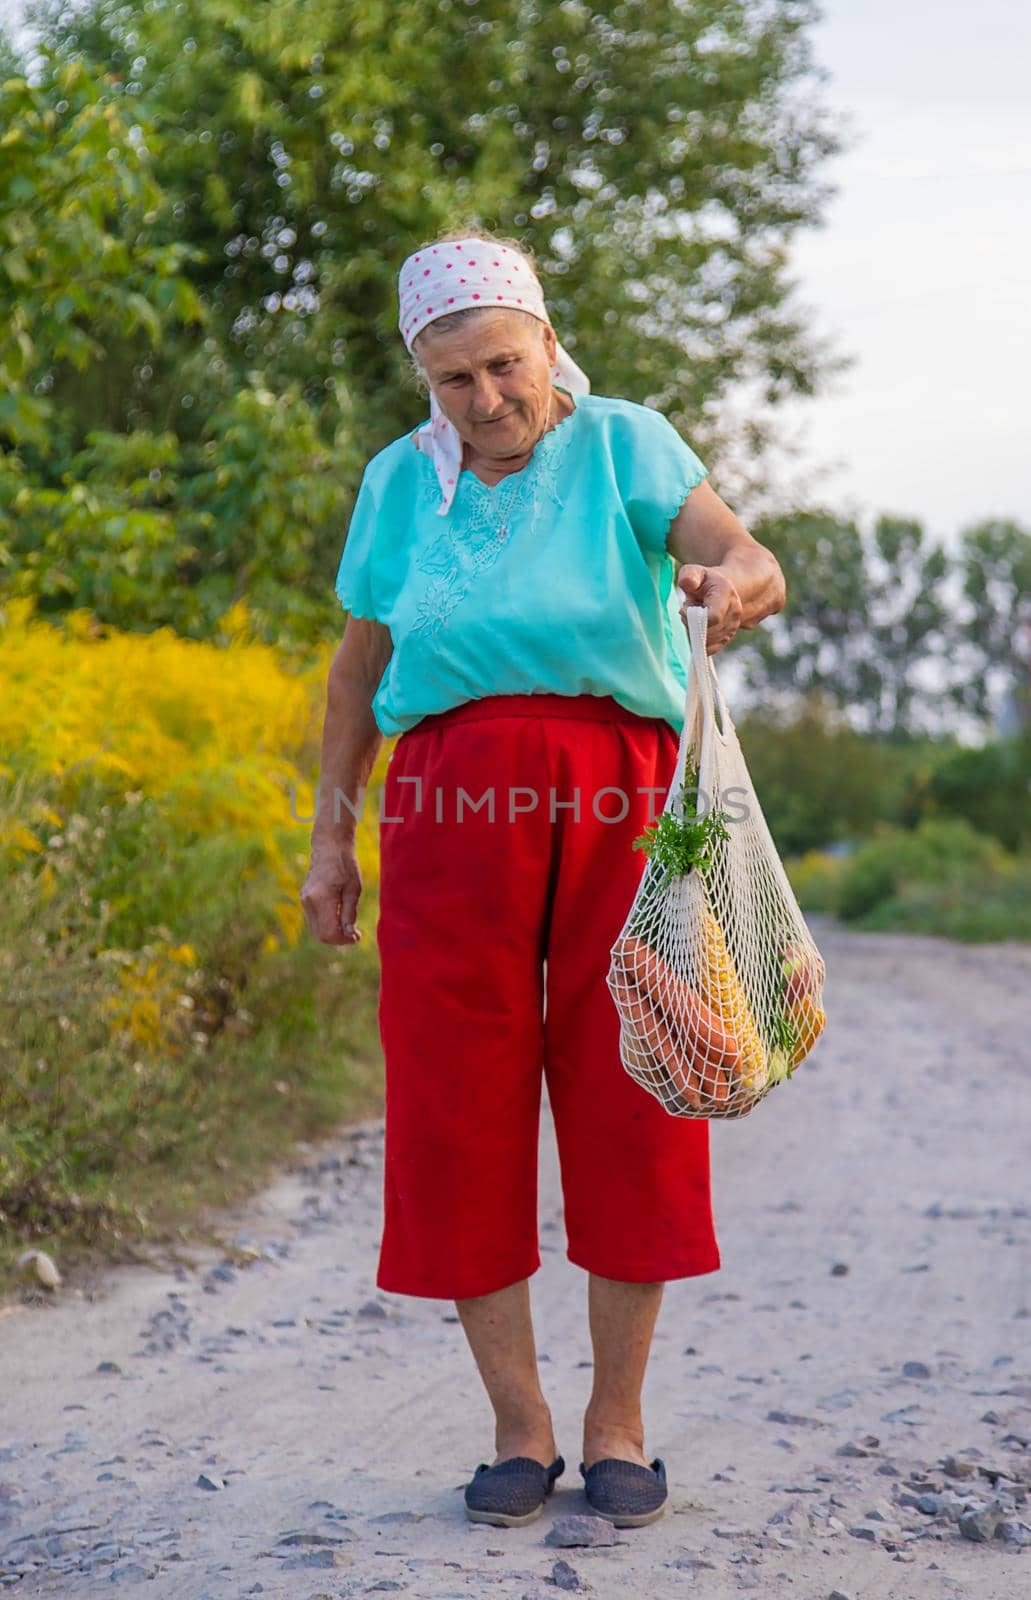 Grandmother carries vegetables in a shopping bag. Selective focus. by yanadjana